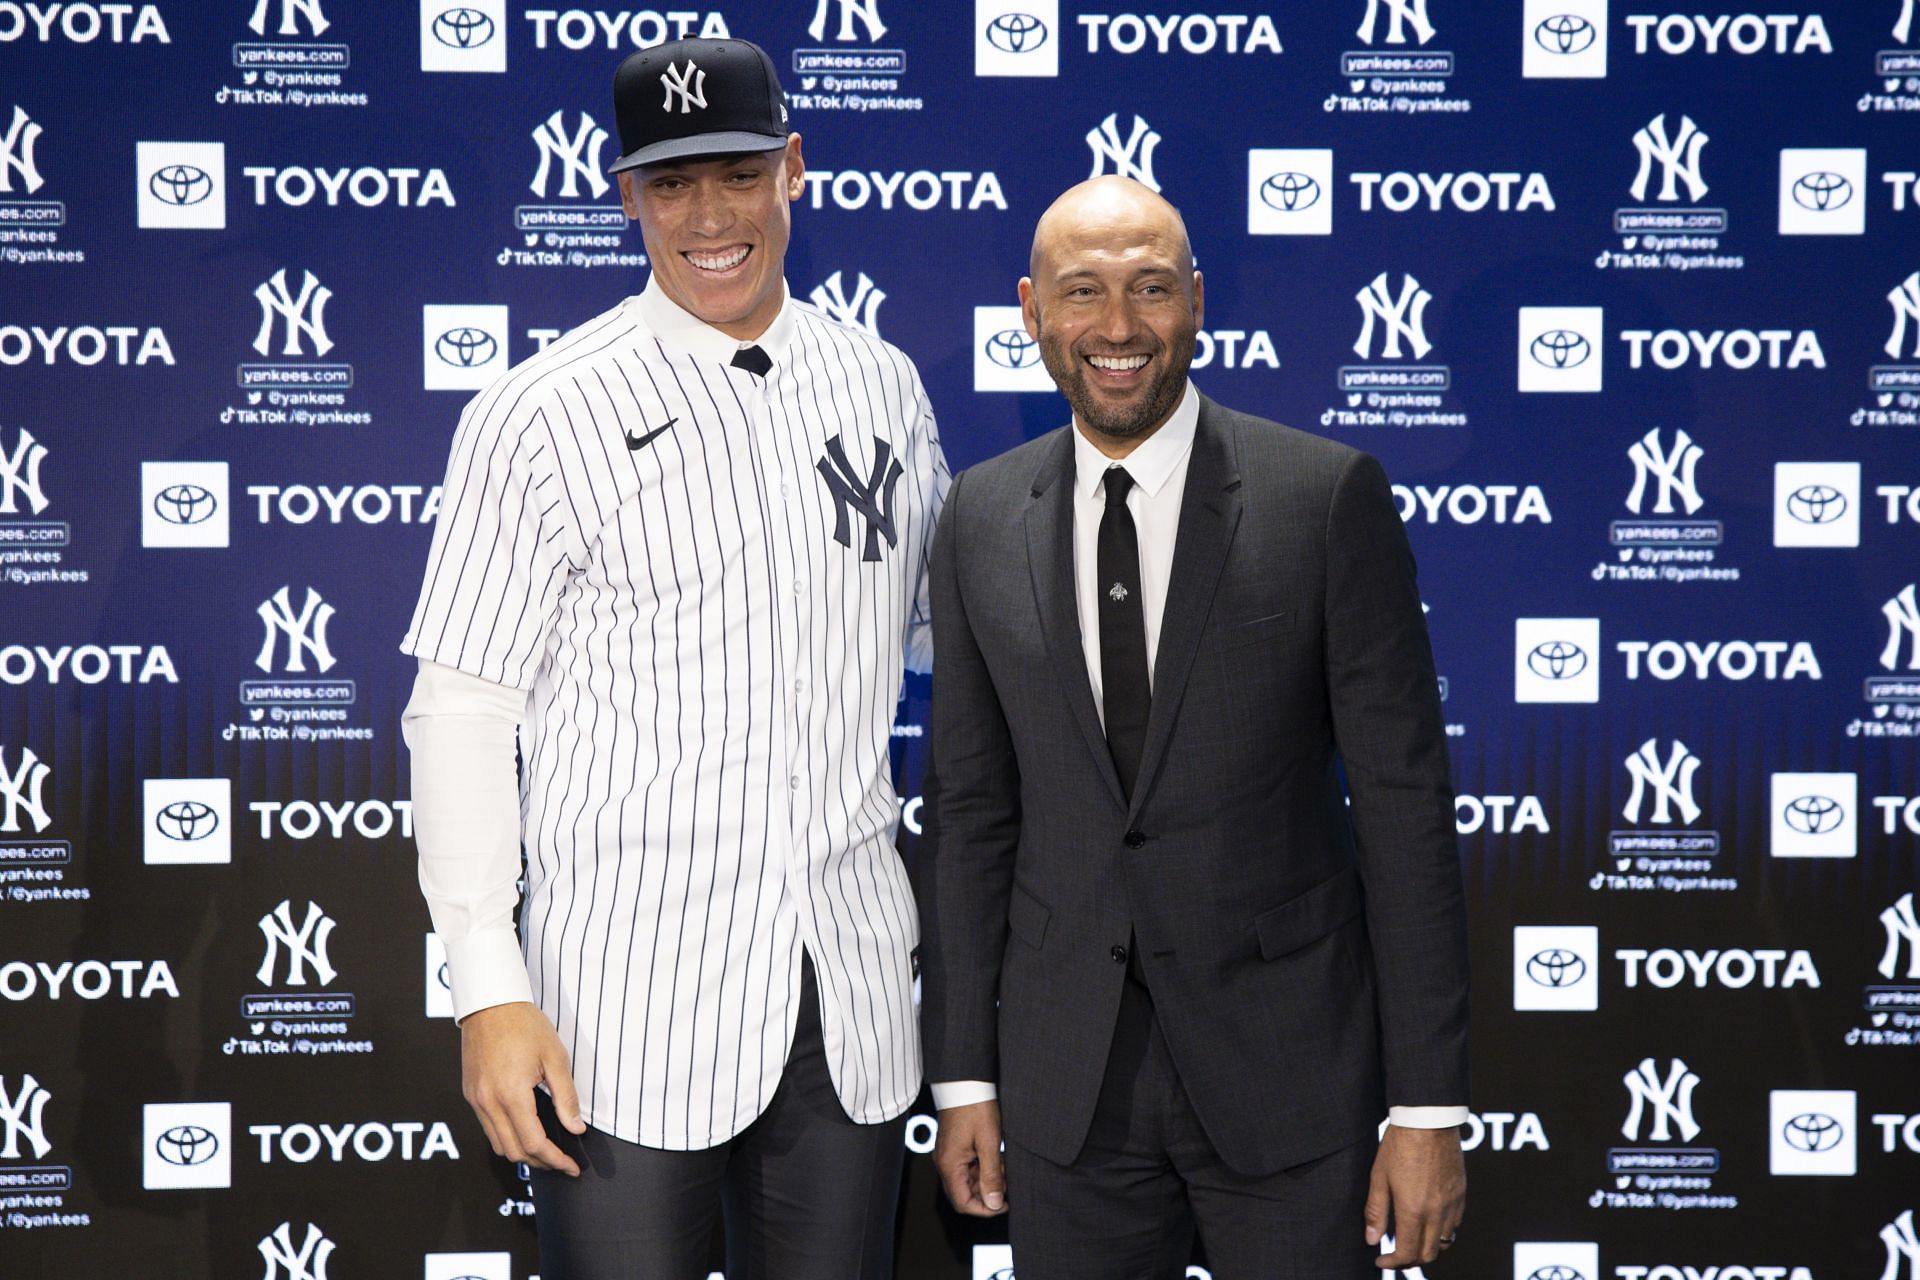 Derek Jeter welcomed a new son to the world